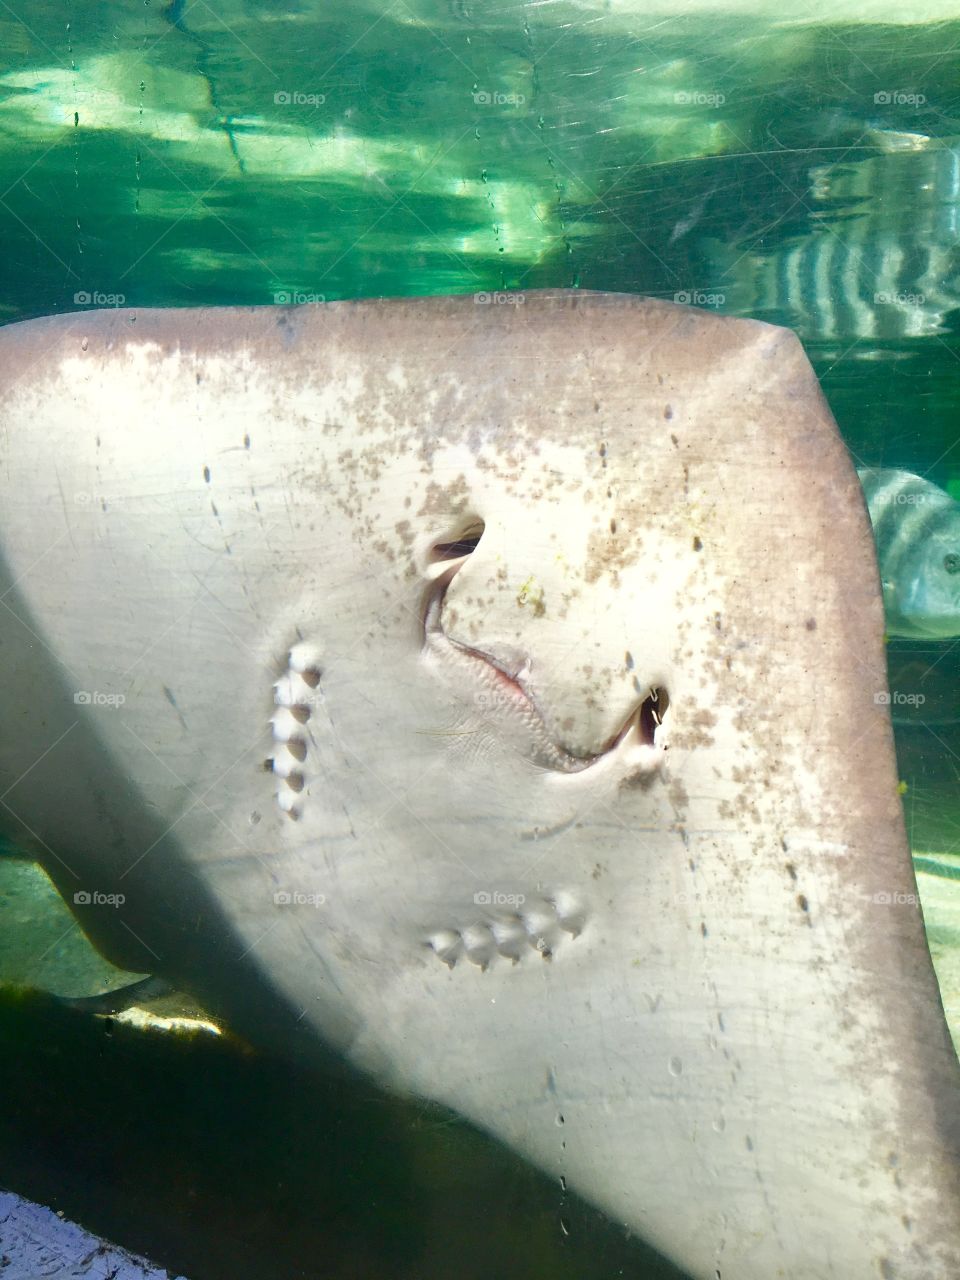 Sting Ray in Florida